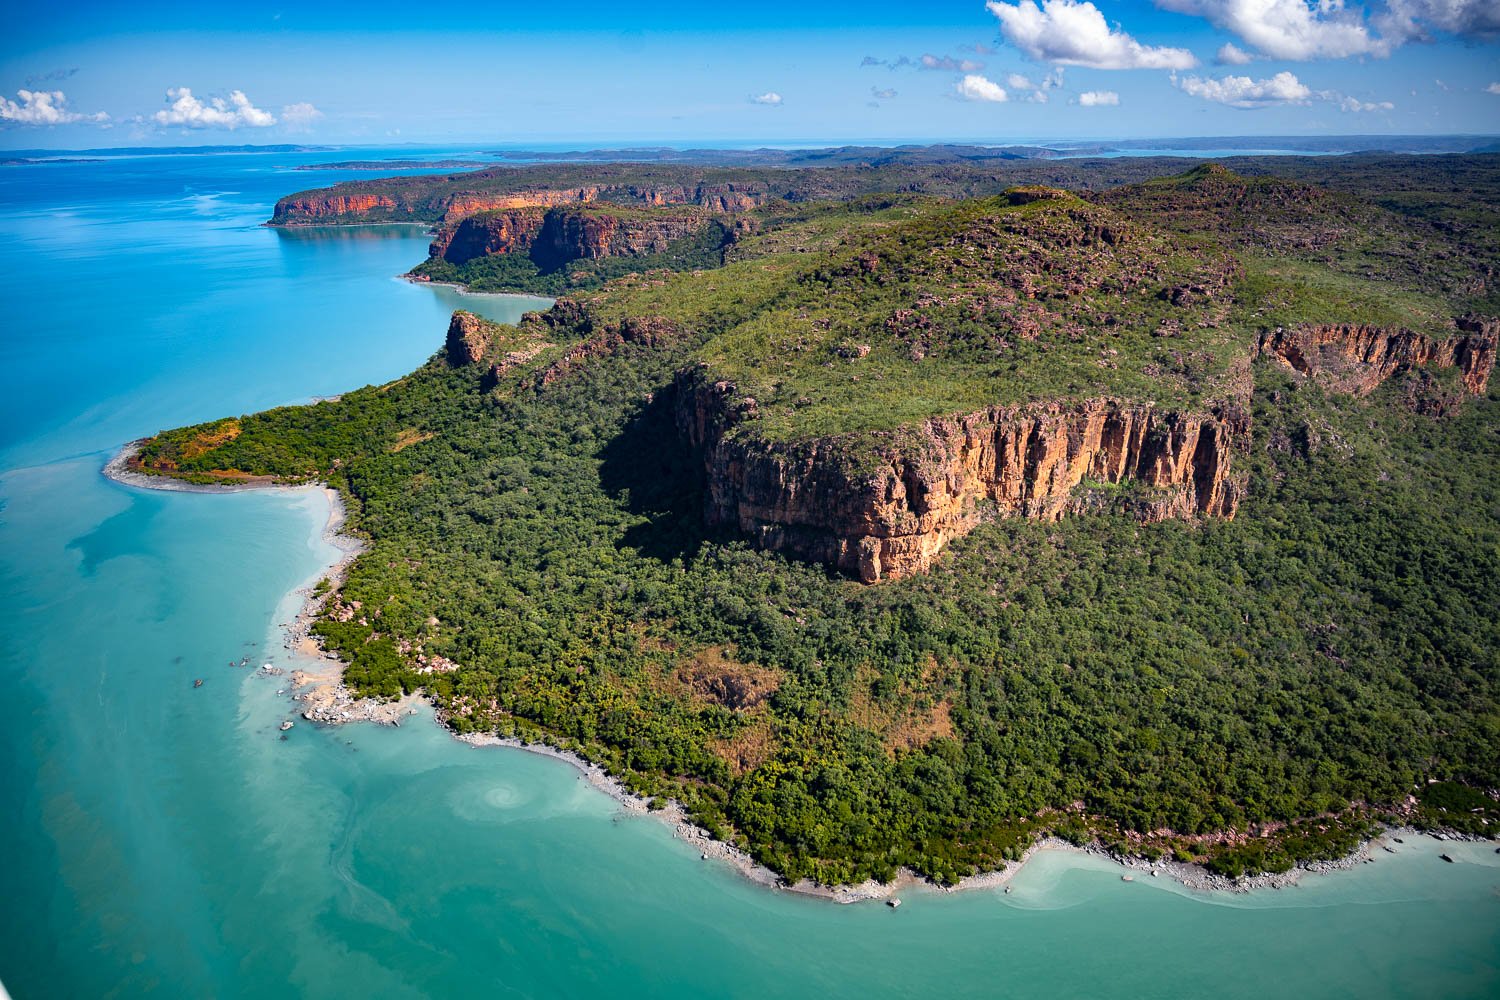 A large island covered fully with greenery, Hunter River Headland, The Kimberley